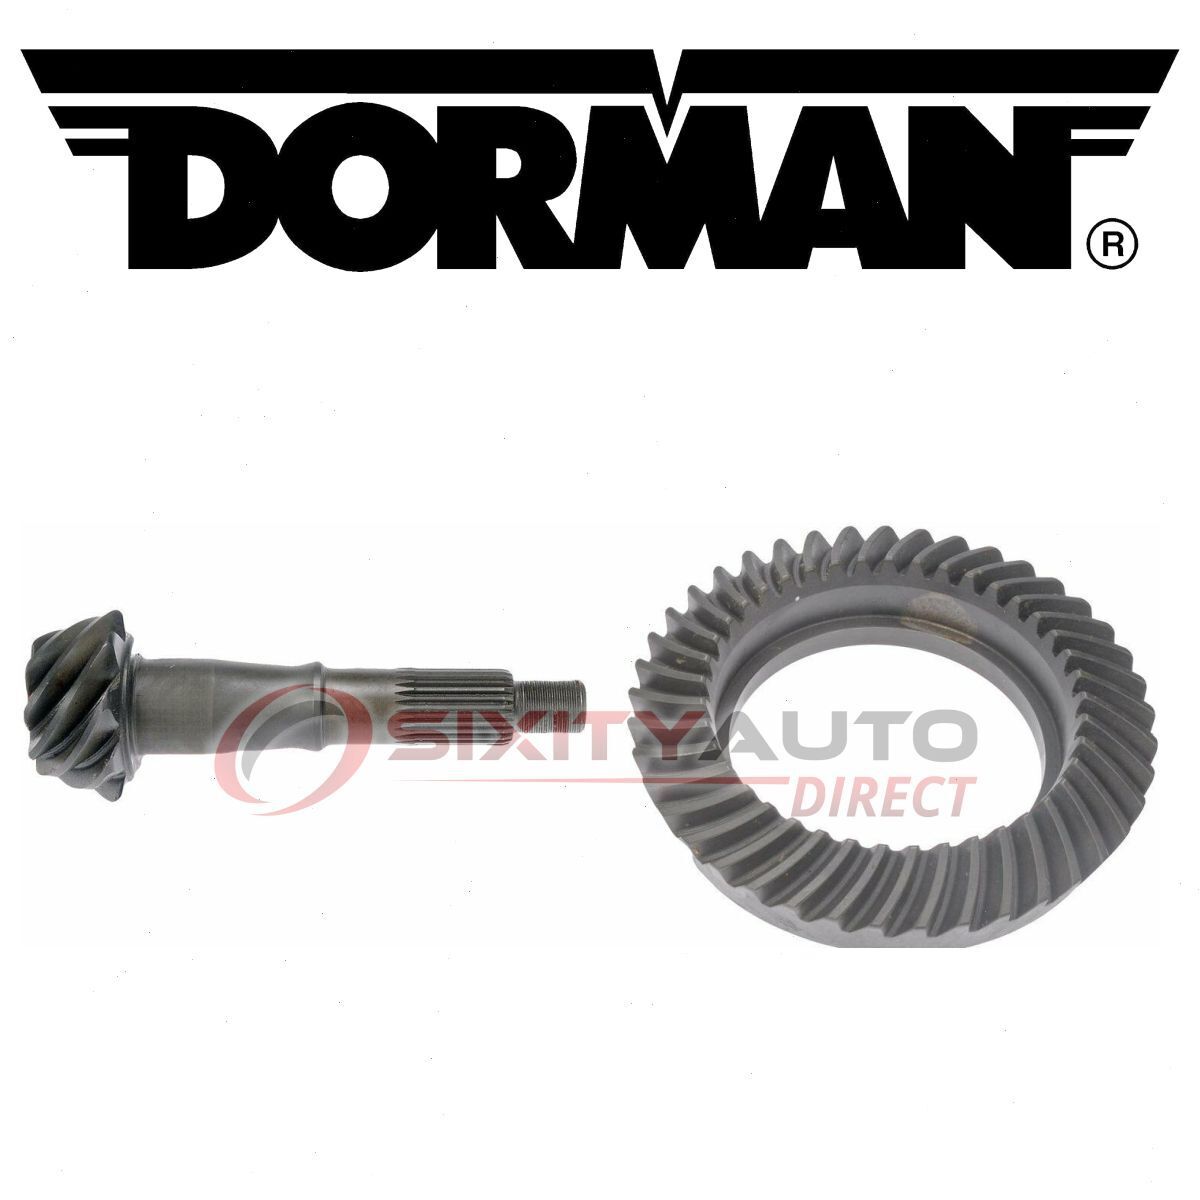 Dorman Rear Differential Ring & Pinion for 1978-1987 Oldsmobile Cutlass rd